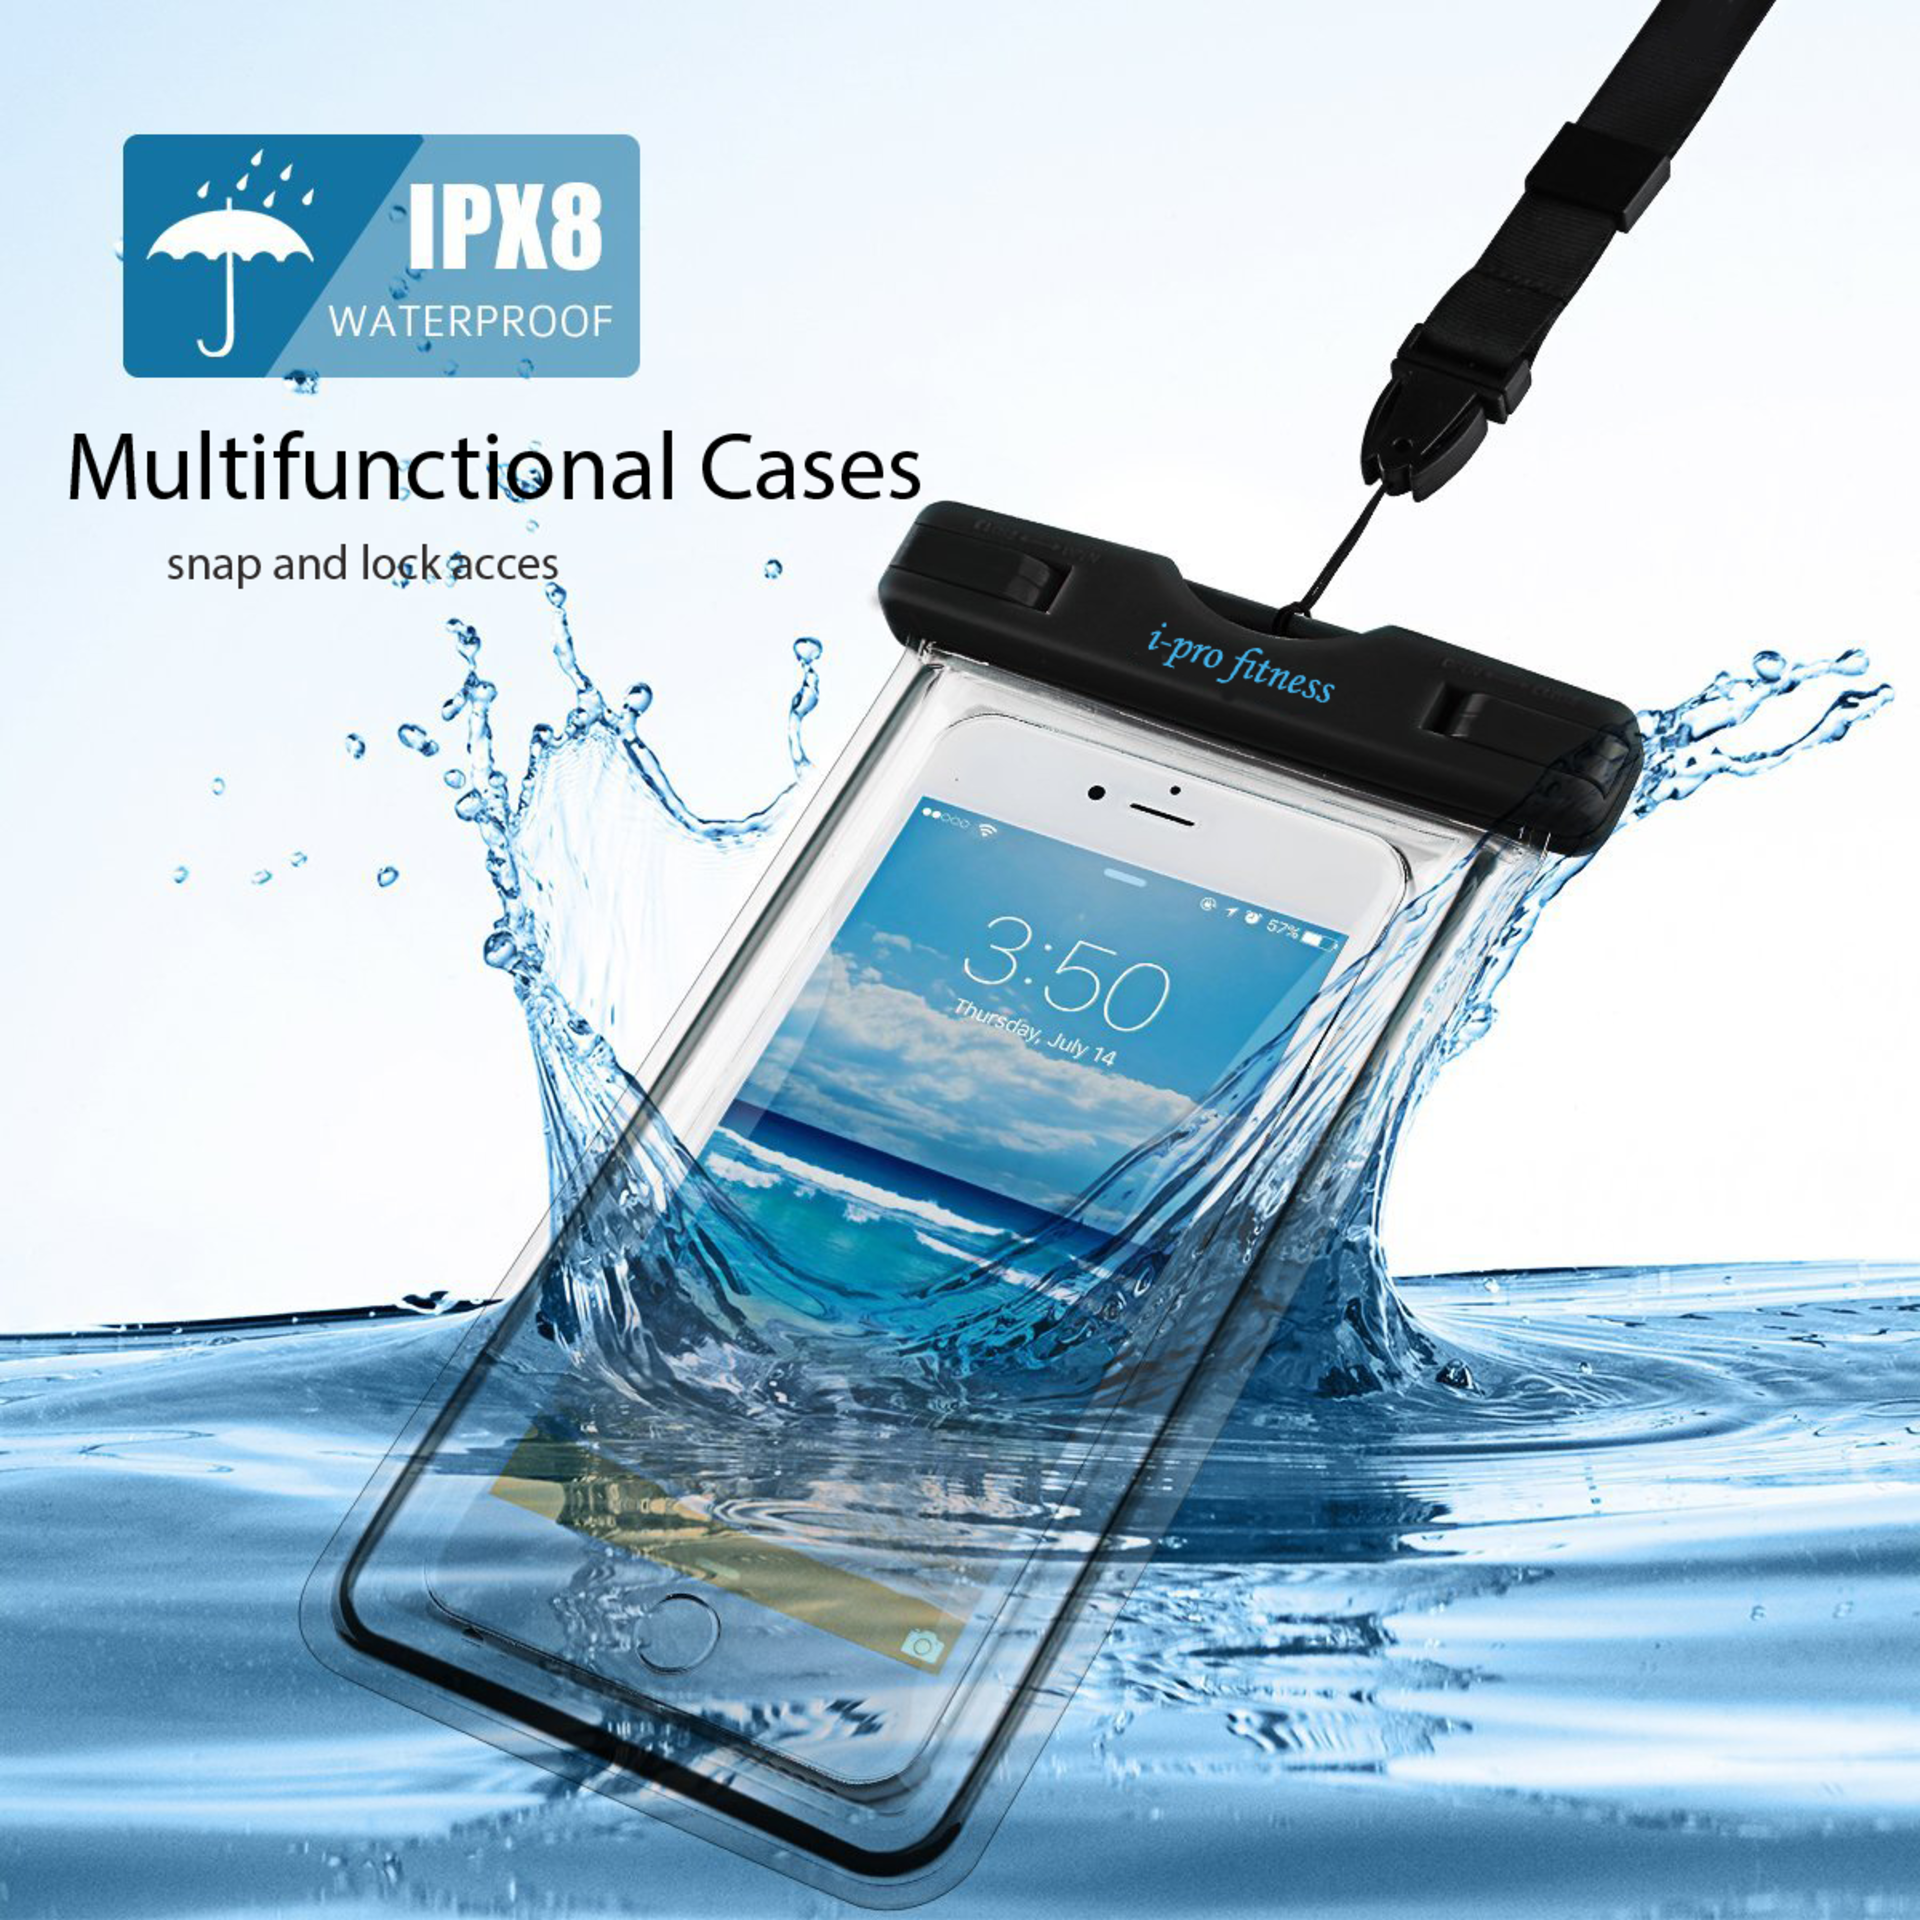 * Trade Lot * 100x Units Submersible Underwater waterproof Phone Carry Case